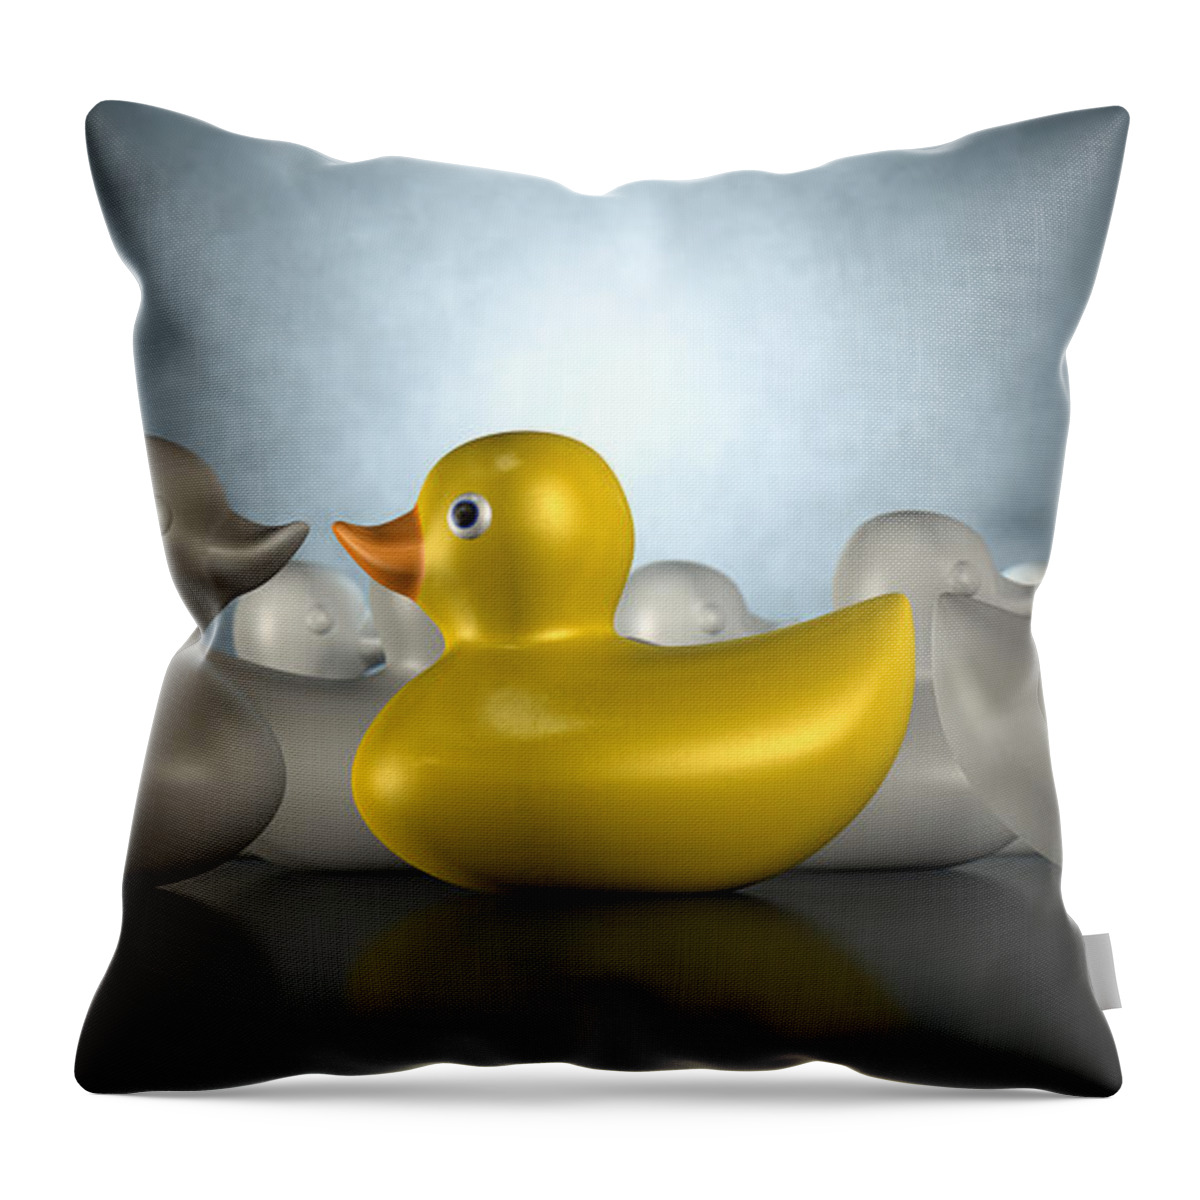 Duck Throw Pillow featuring the digital art Rubber Duck Against The Flow by Allan Swart